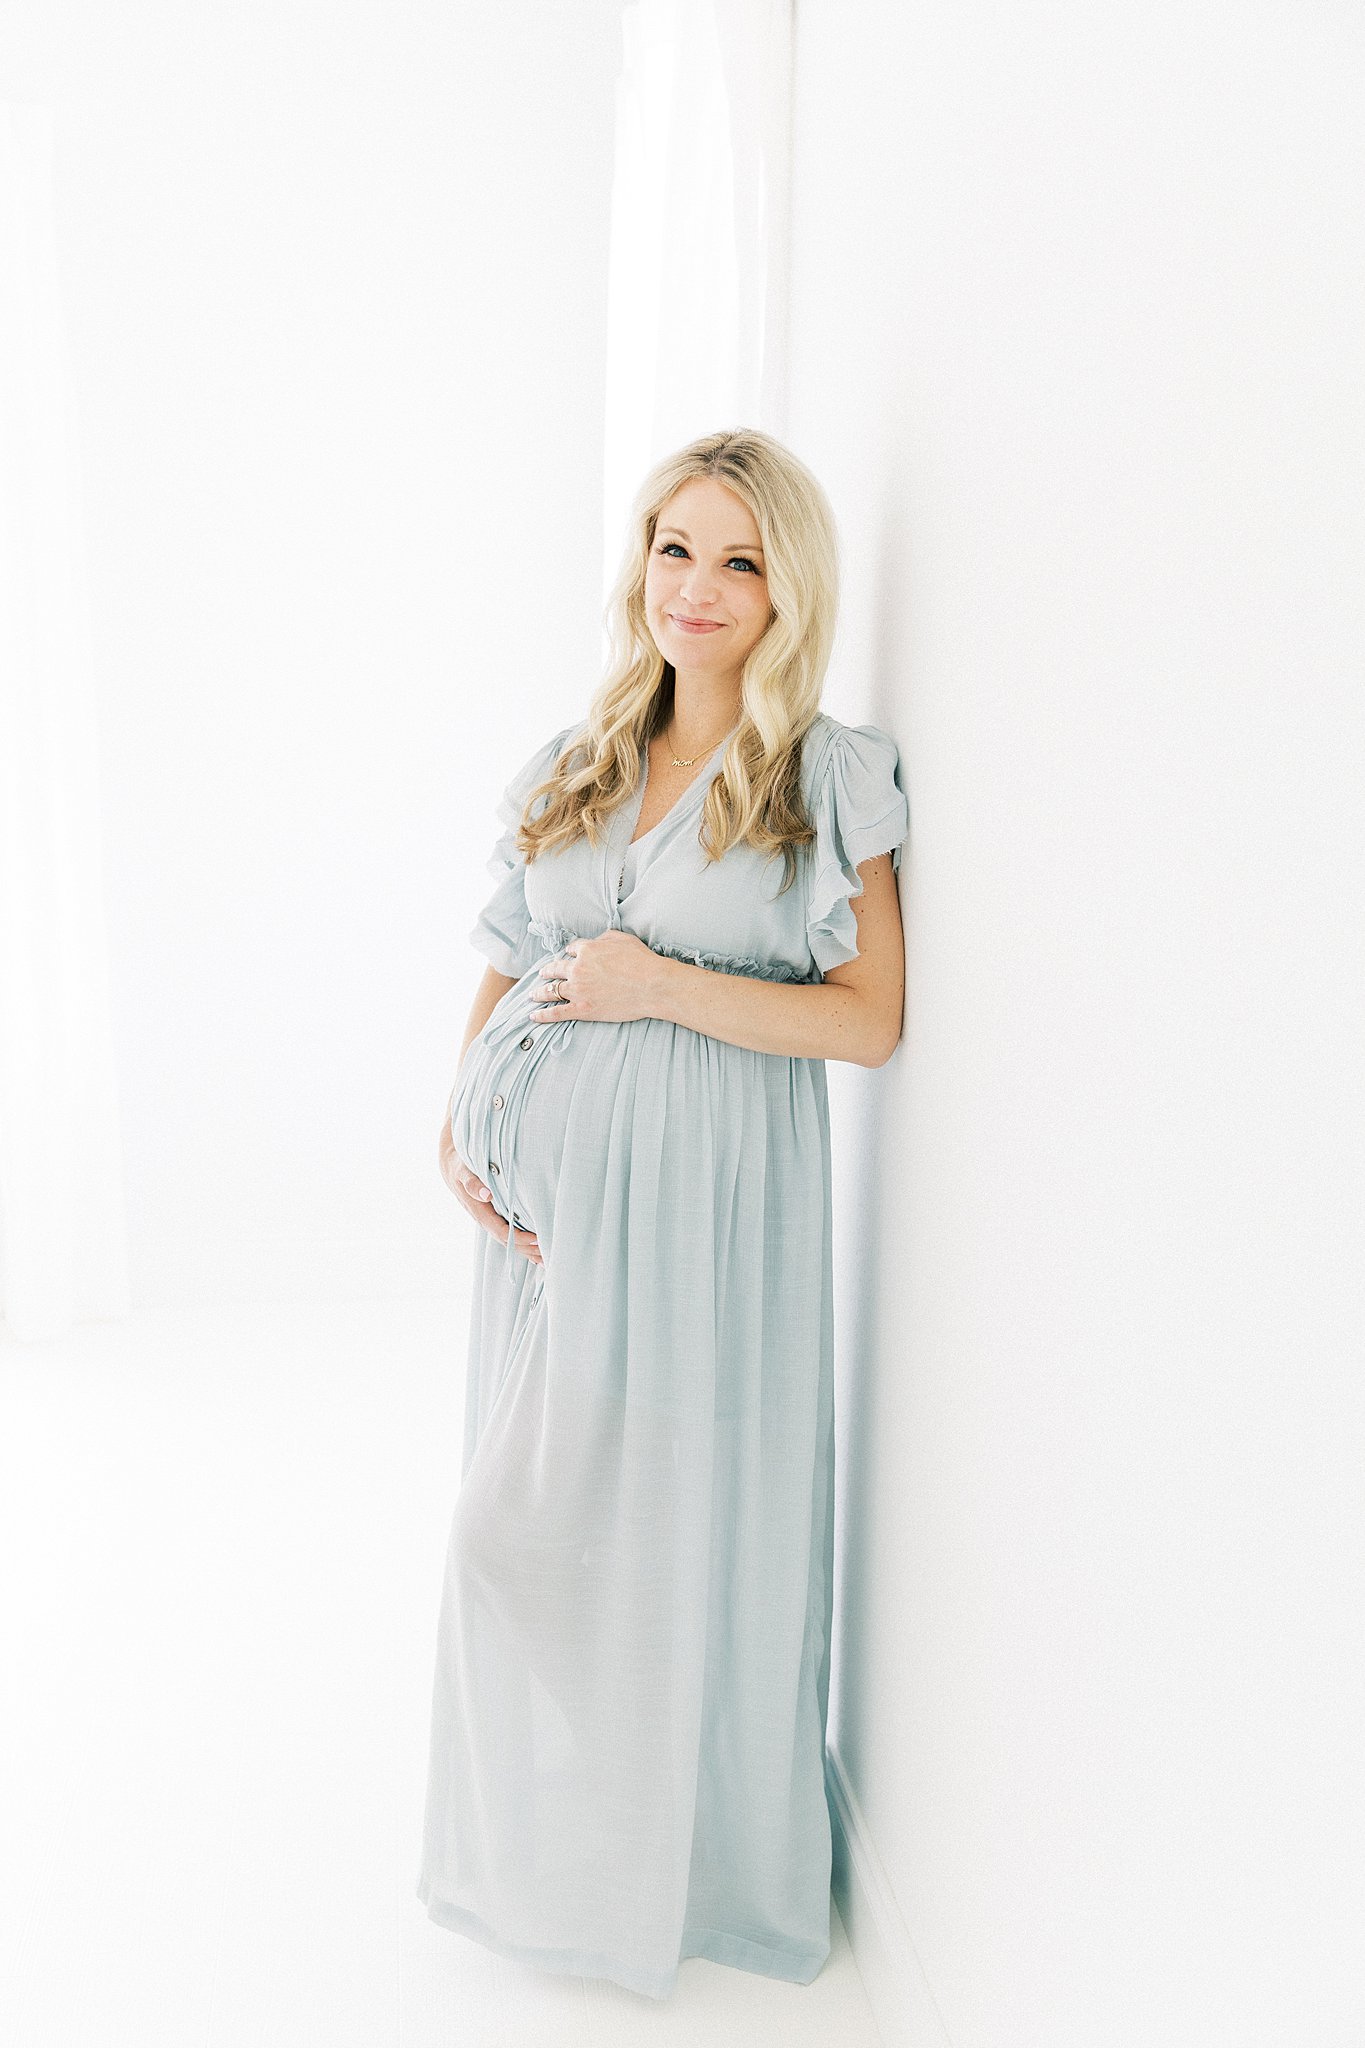 A mom to be leans against a wall in a white studio by a window holding her bump in a blue maternity dress after visiting Lovers Lane Birth Center